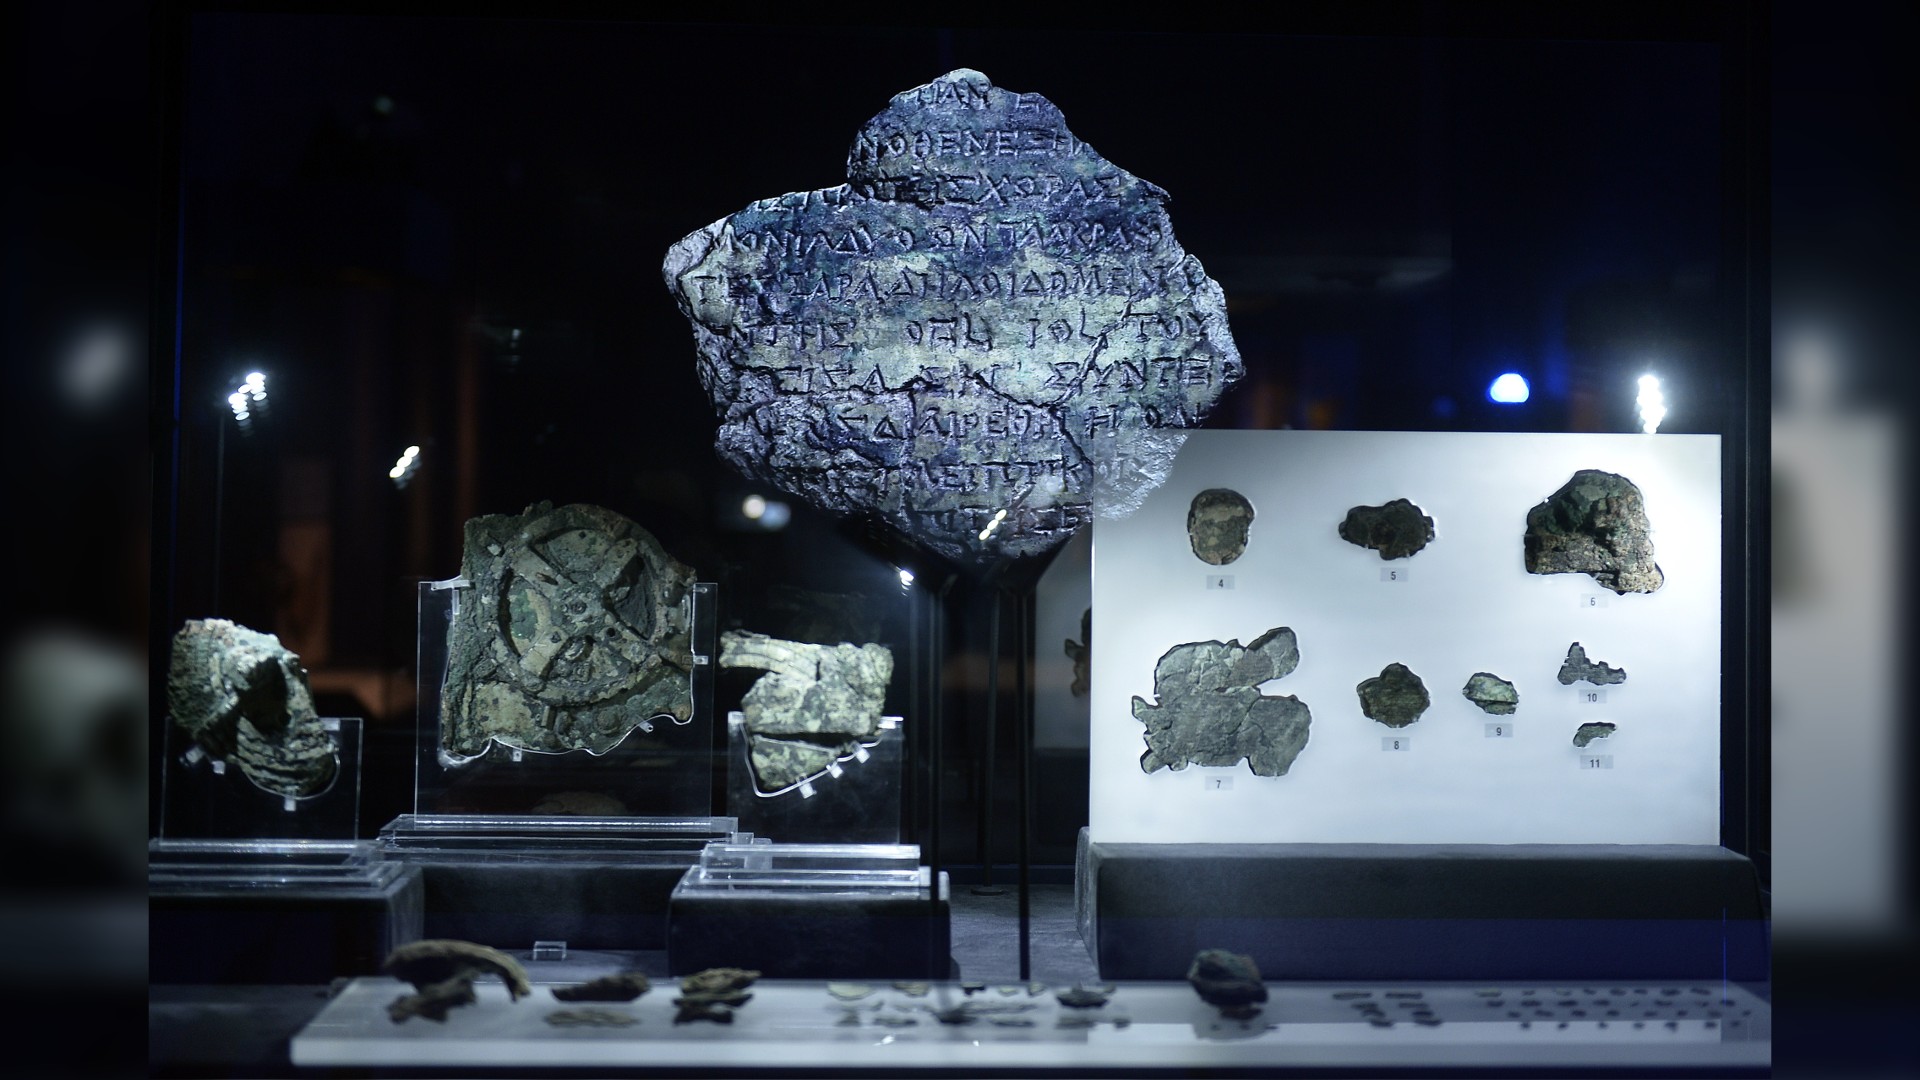 This September 14, 2014 photo taken at the Archaeological Museum of Athens shows fragments of the Antikythera mechanism, a 2nd century BC device known as the world's oldest computer used to track astronomical phenomena and the cycles of the solar system . Here we see several items on display, all corroded. There is a large piece in the middle with some ancient languages ​​on it.